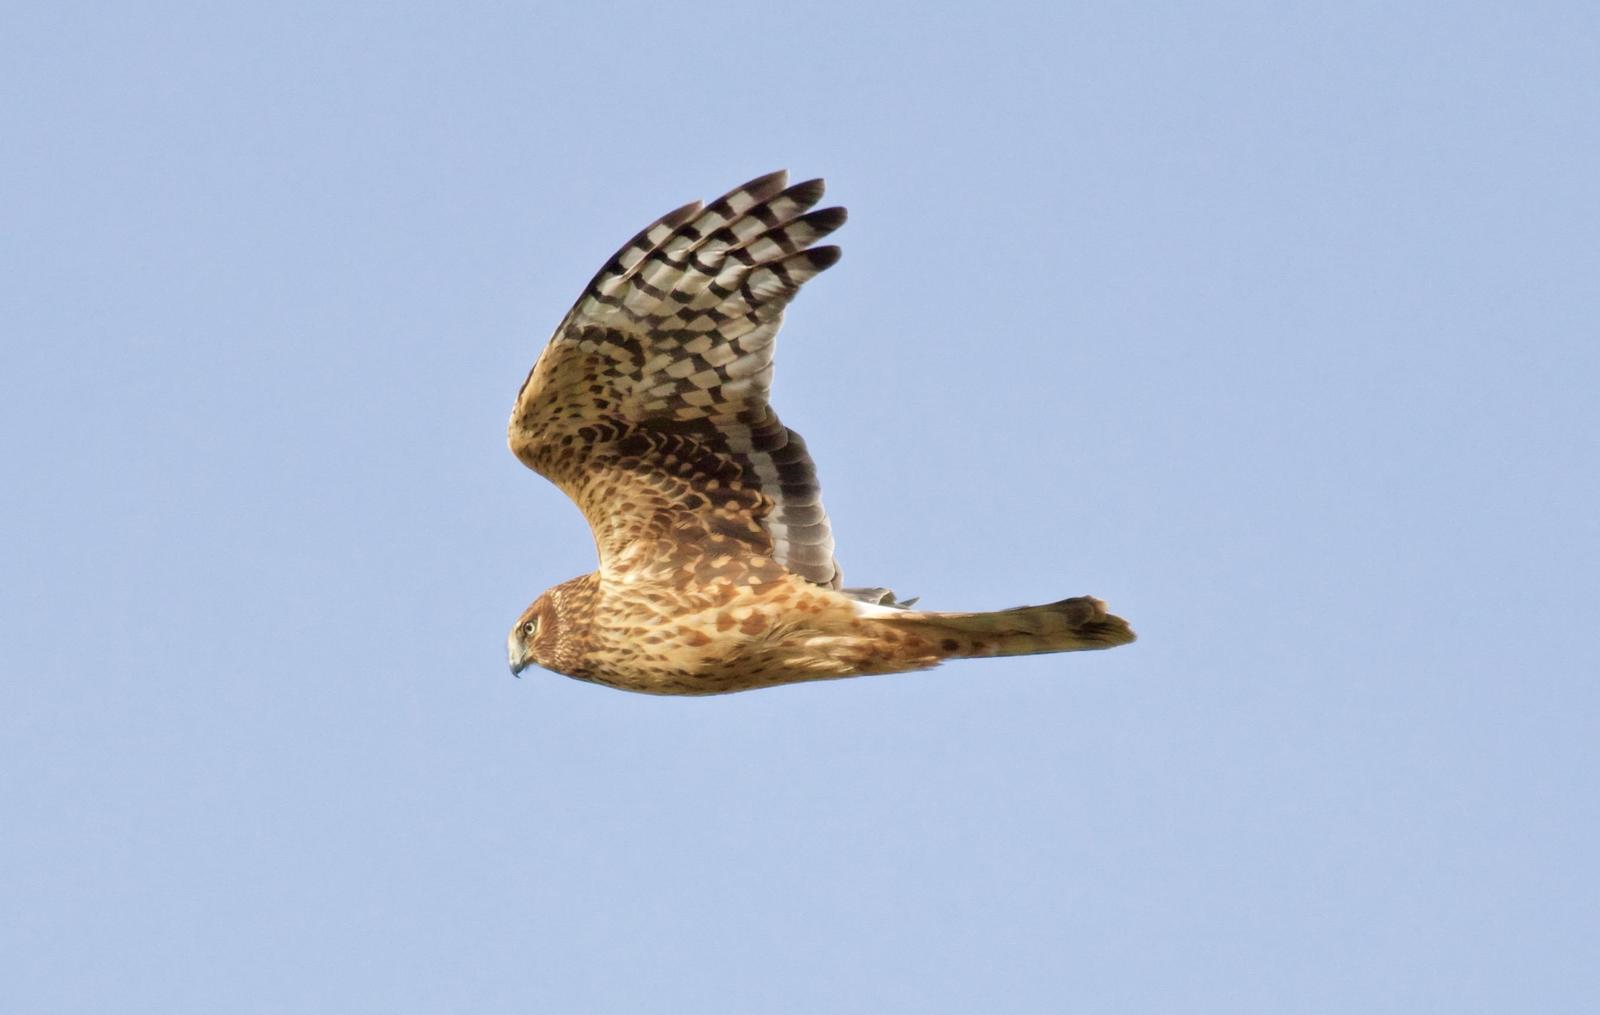 Northern Harrier Photo by Kathryn Keith